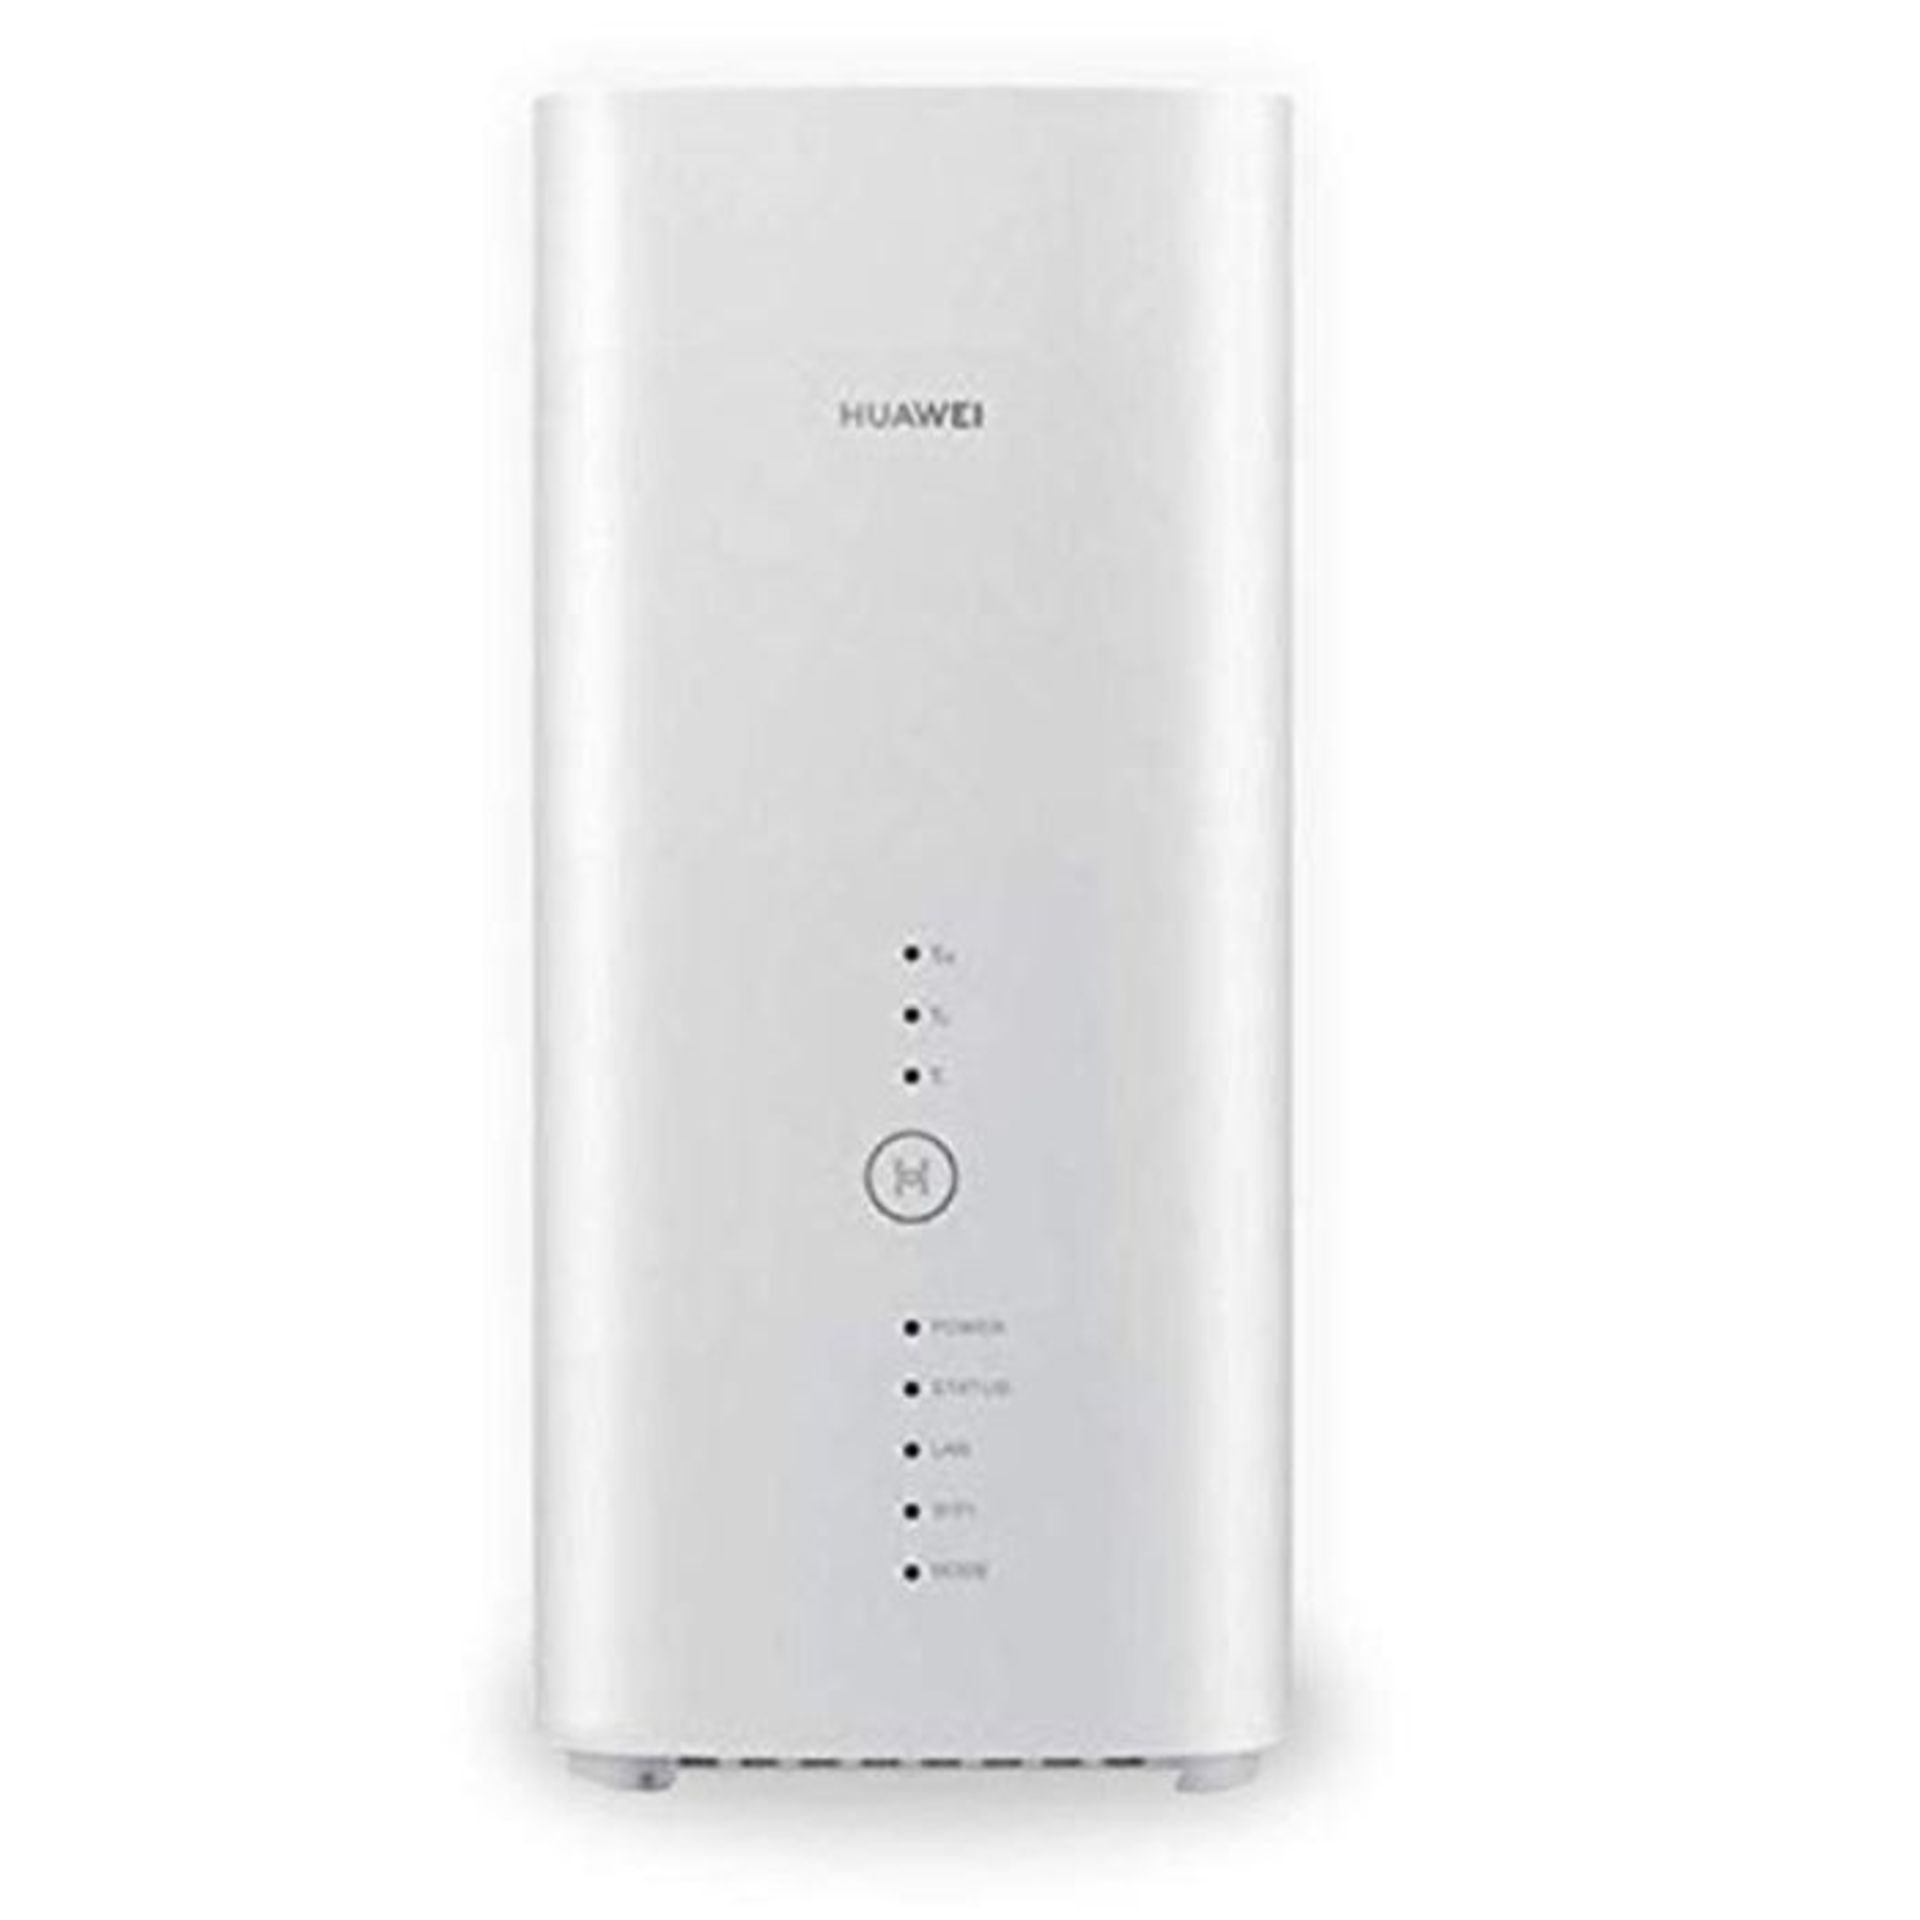 RRP £227.00 Keepgo Huawei B818 LTE CAT19 Mobile Router 1.6Gbps DL (White)